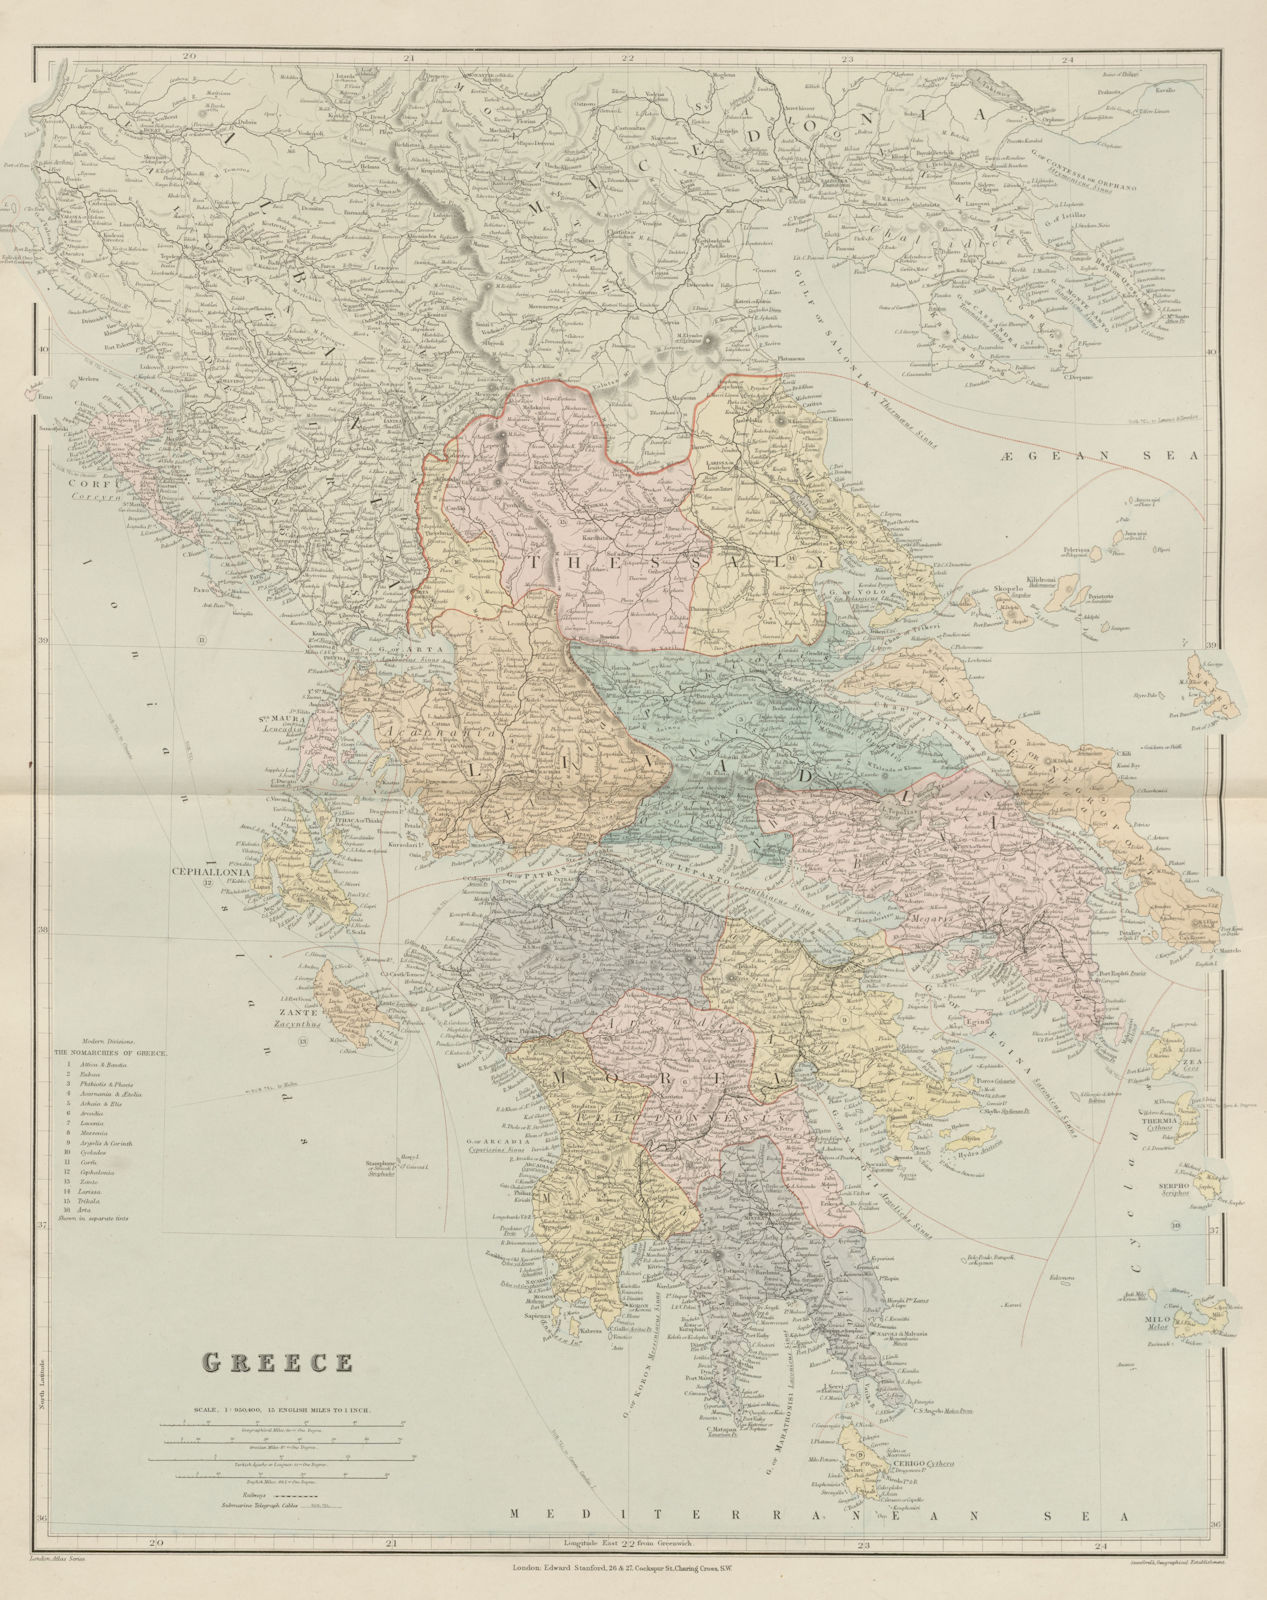 Associate Product Greece. Nomarchies. Ionian Sporades Cyclades Morea Livadia. STANFORD 1896 map